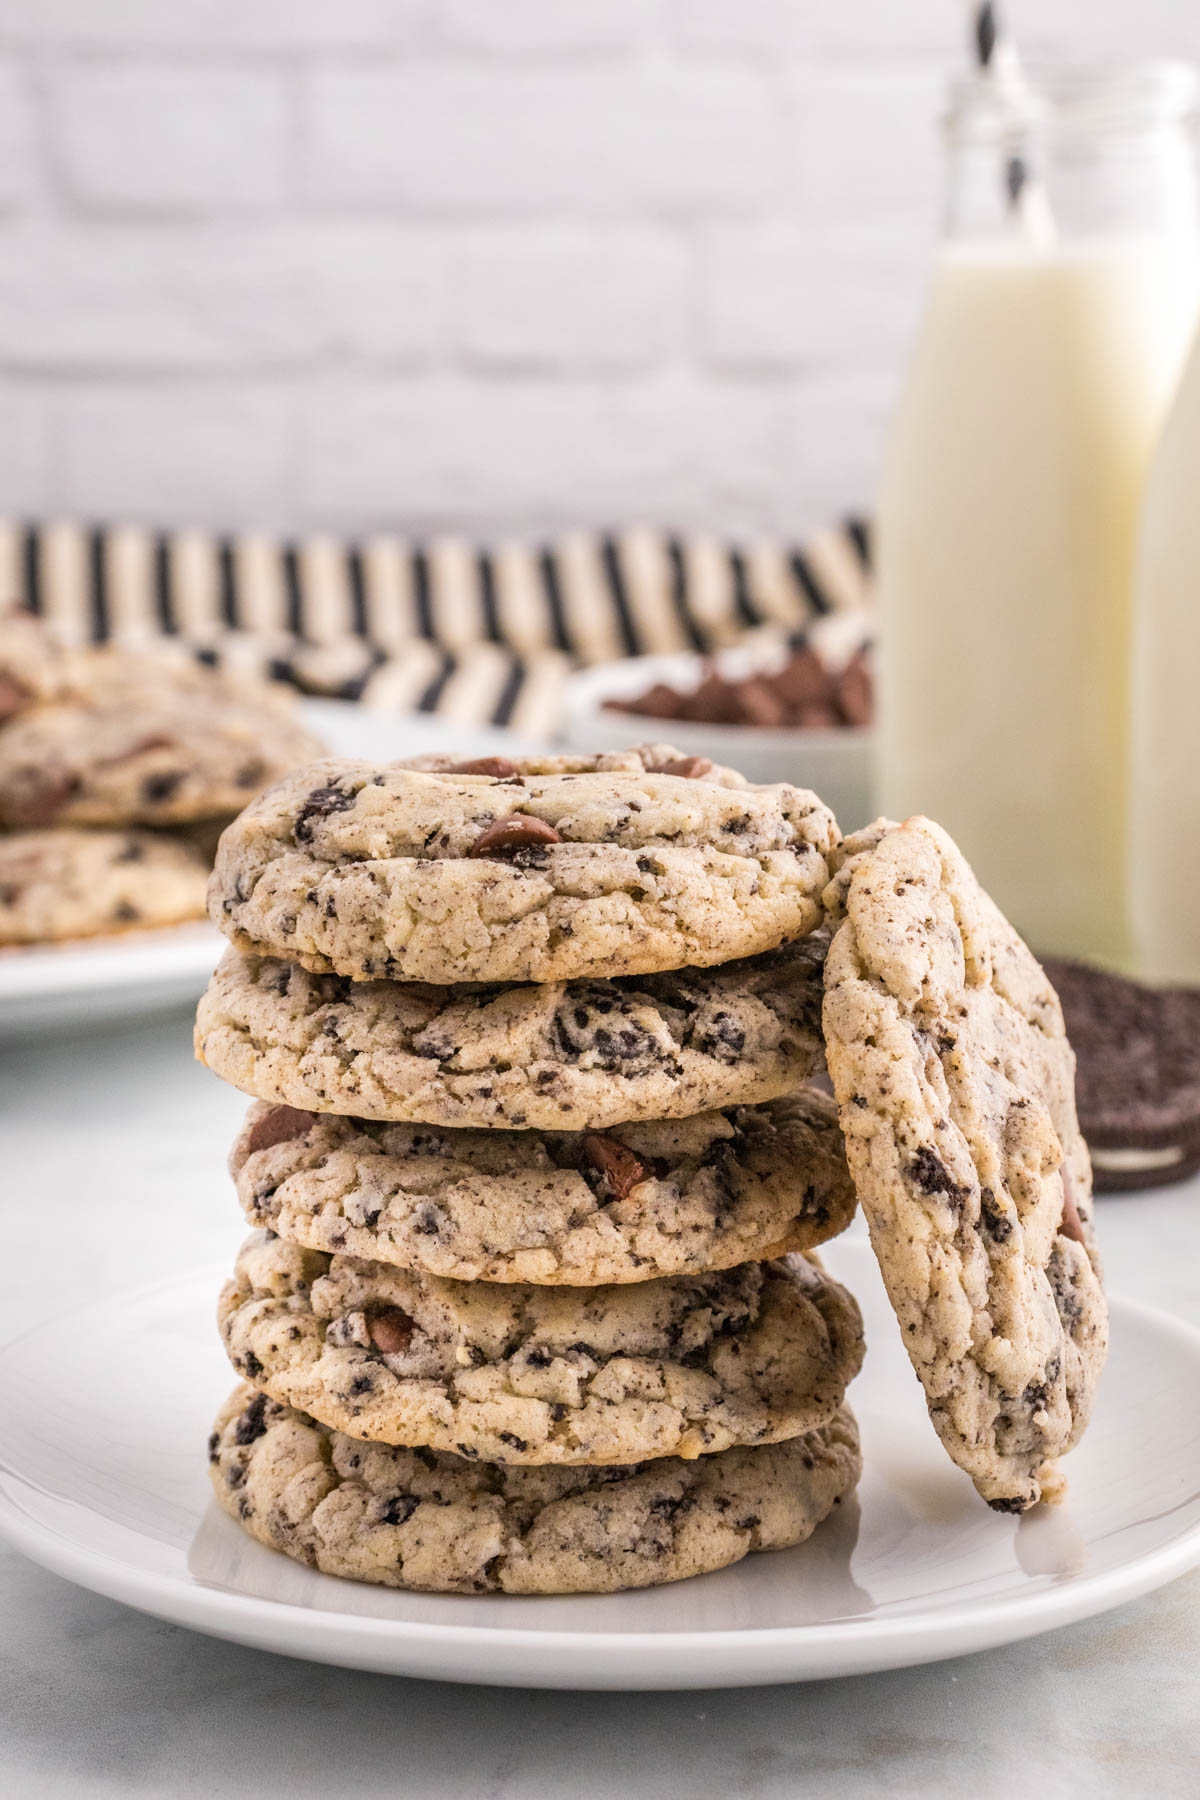 A stack of Oreo Cake Mix cookies on a plate with a glass of milk in the background.